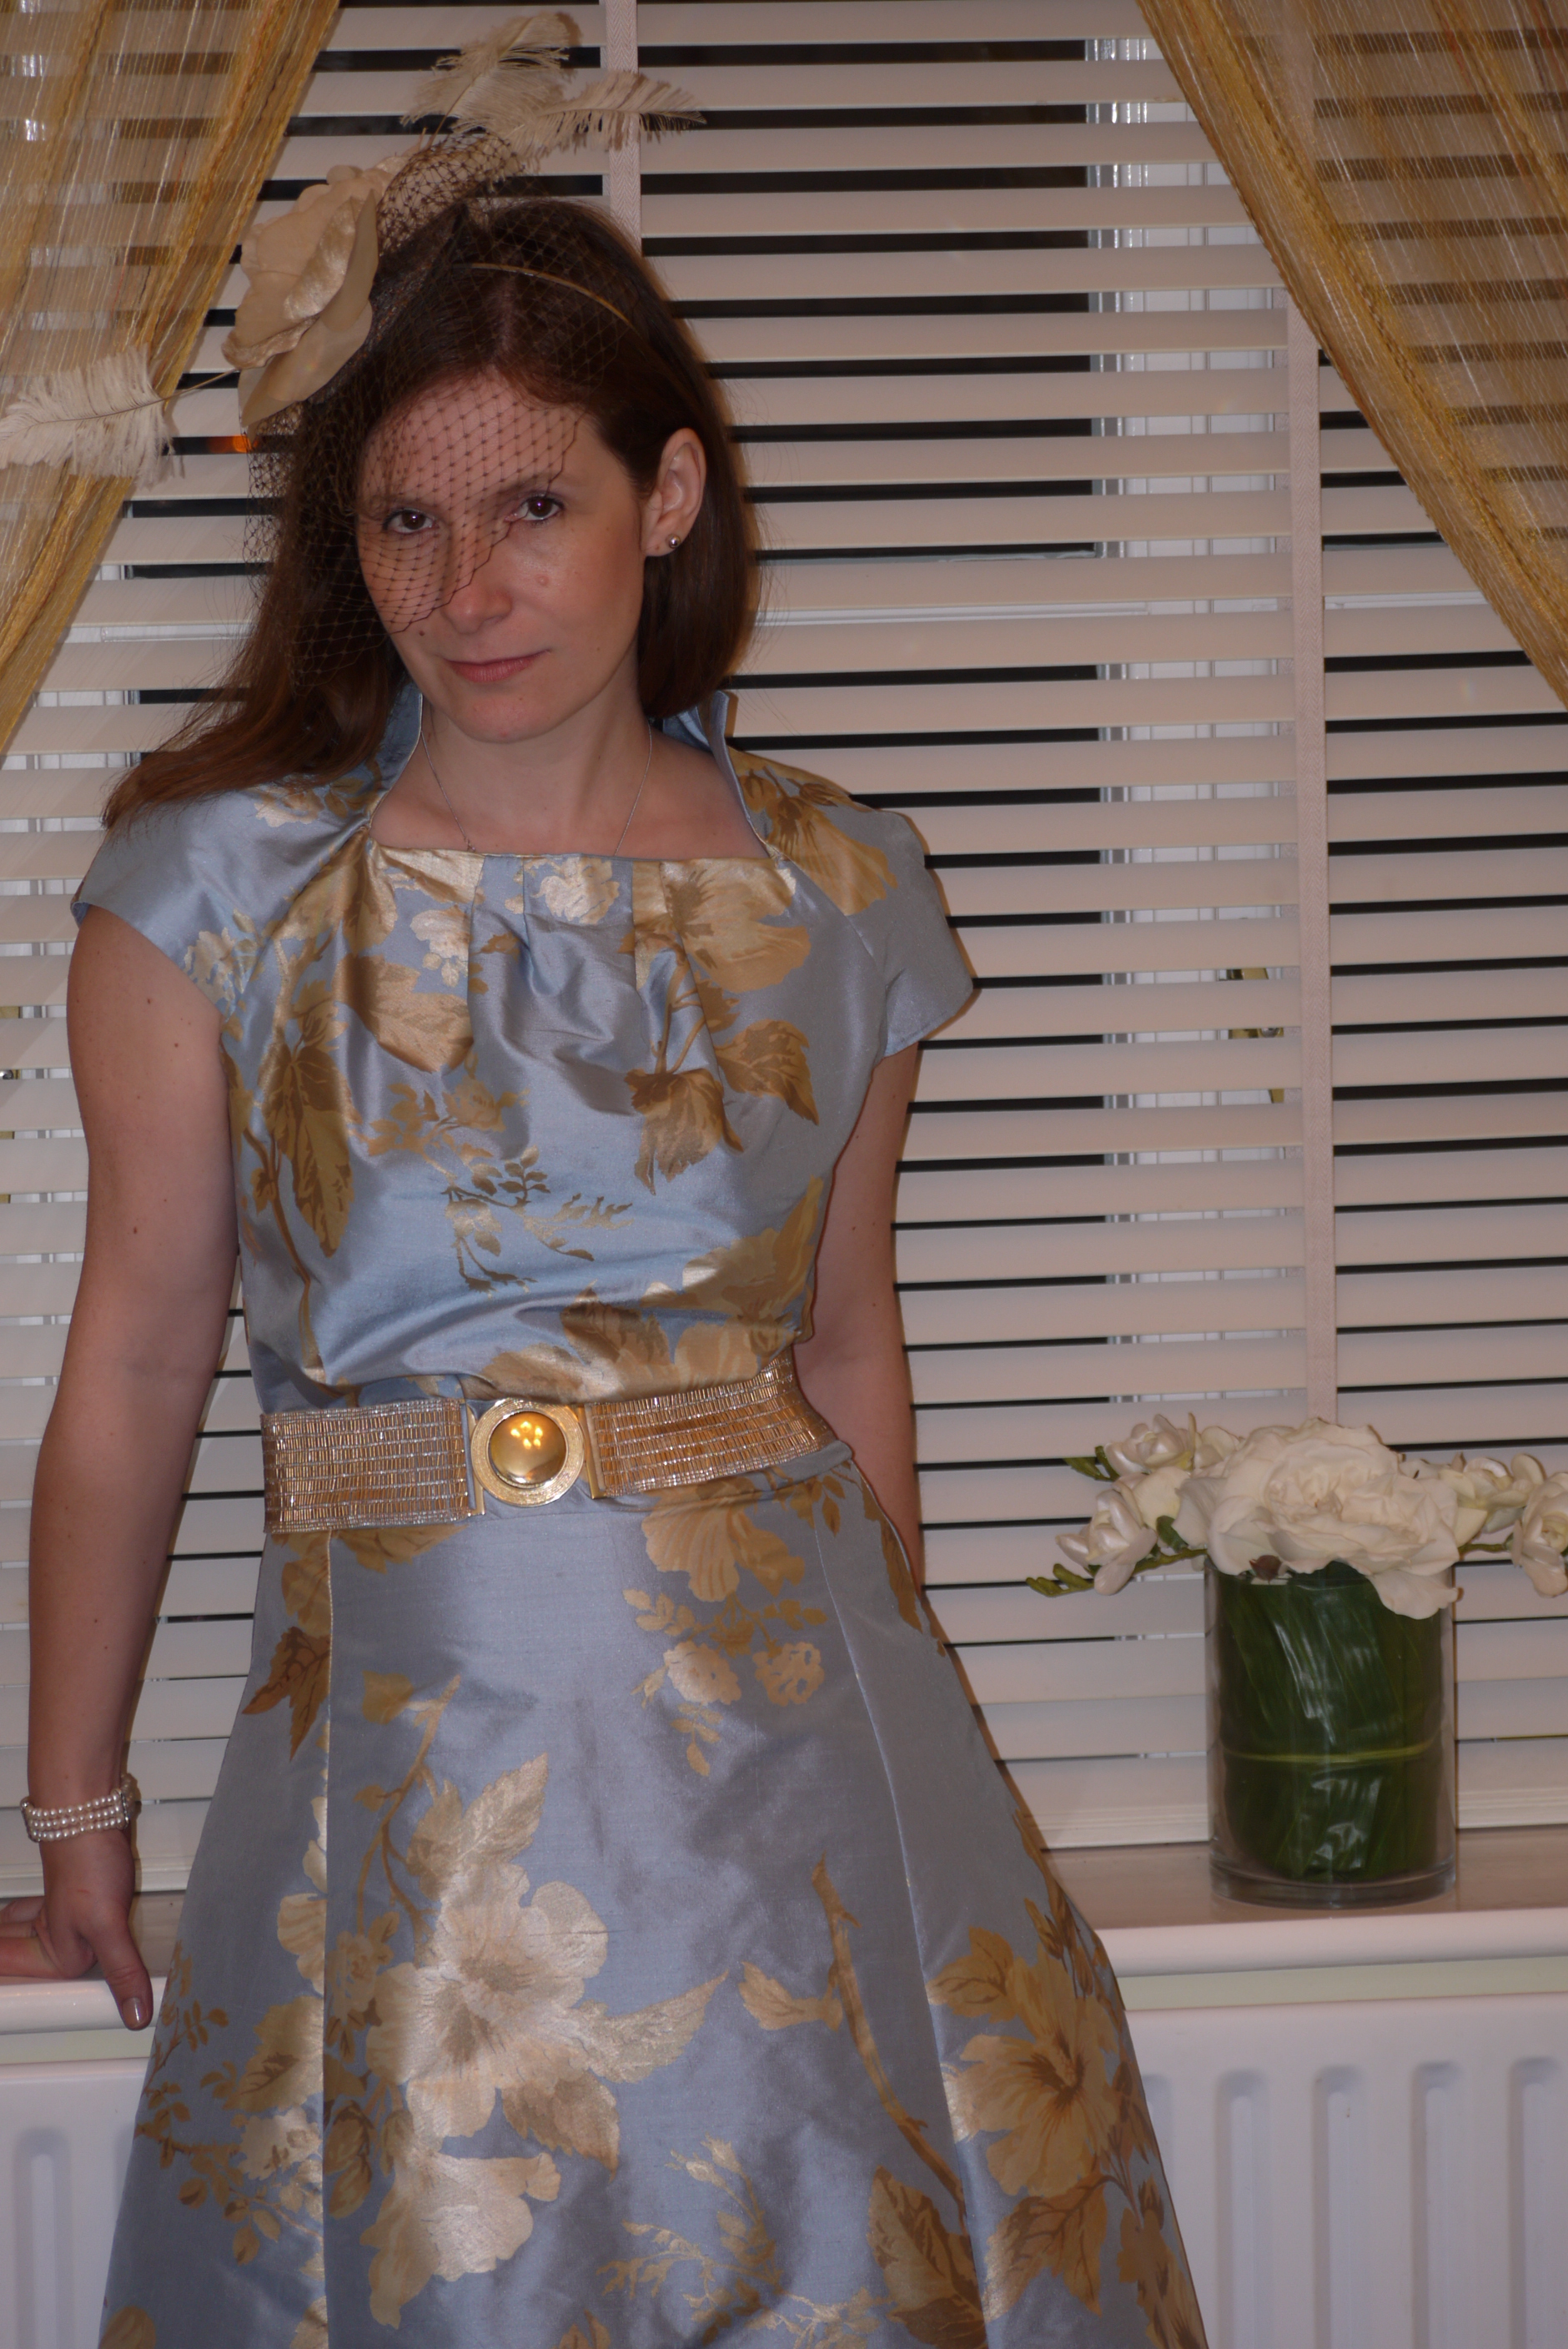 Golden Anniversary dress "Paris is everywhere!" Sewing